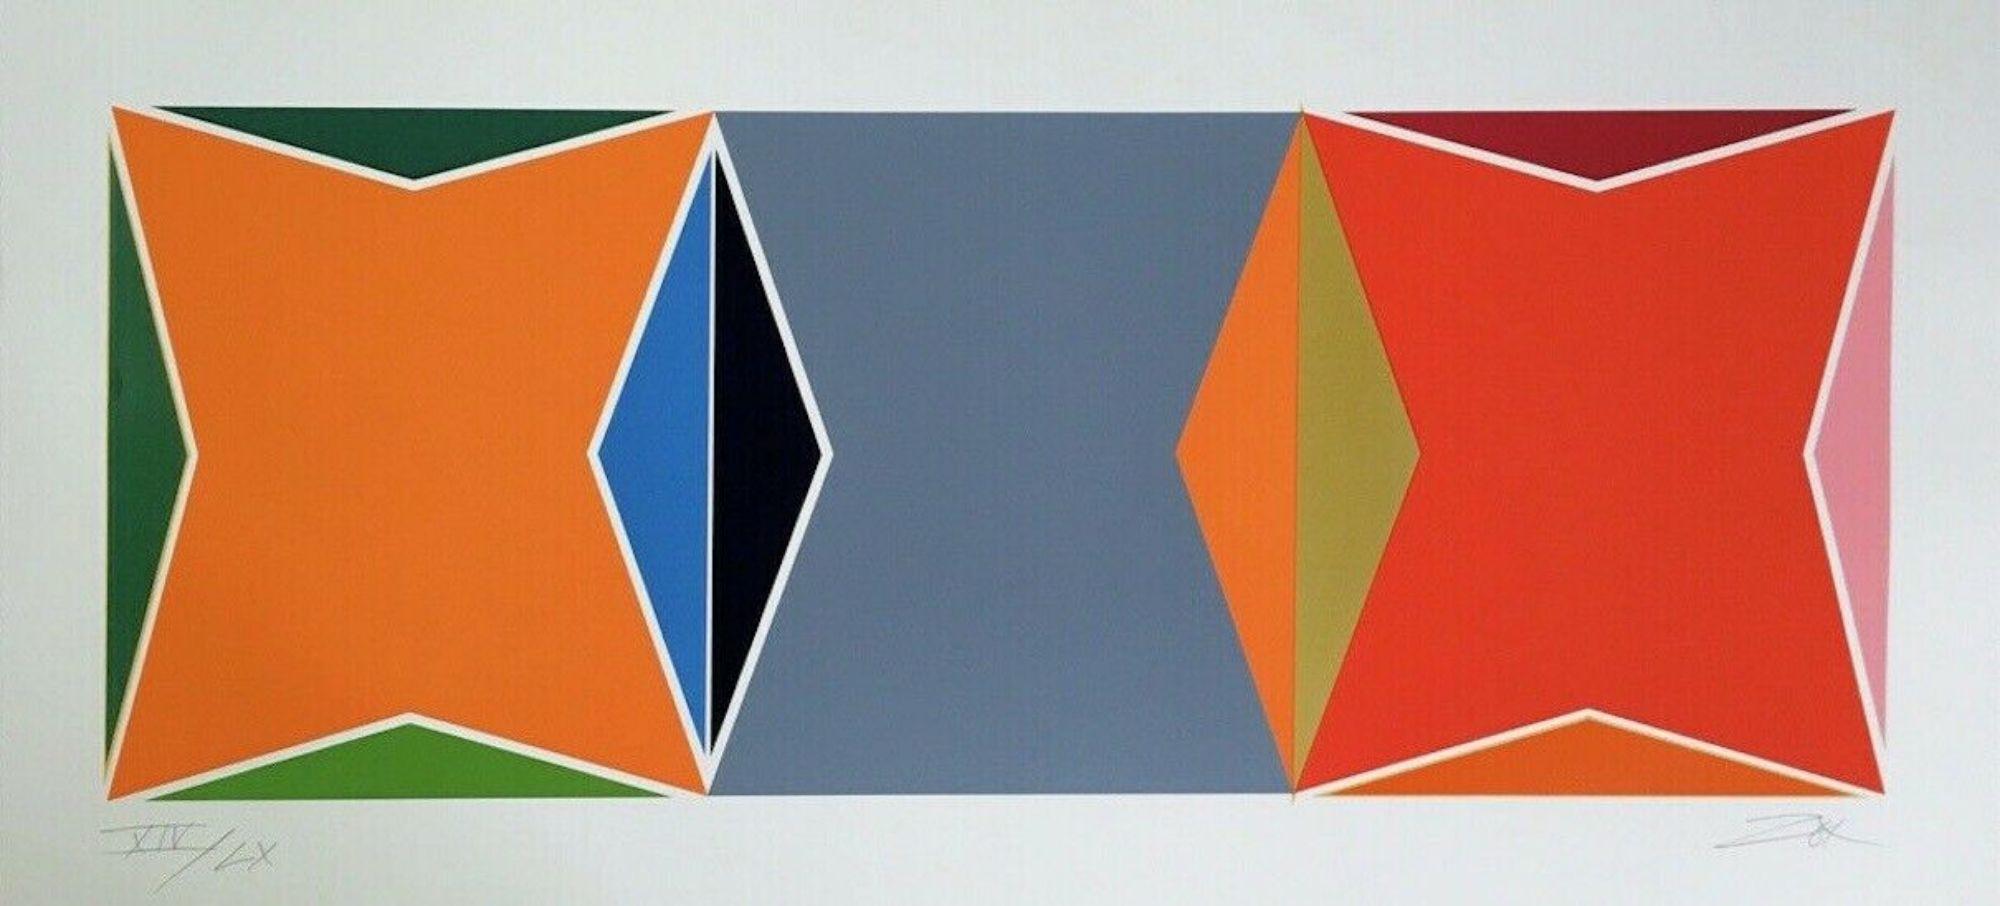 LARRY ZOX (1937-2006) One of the principal representatives of the generation of young painters following the era of the Abstract Expressionists, Zox is best known for his exuberant geometric abstractions. Many classified him as an Abstract artist,